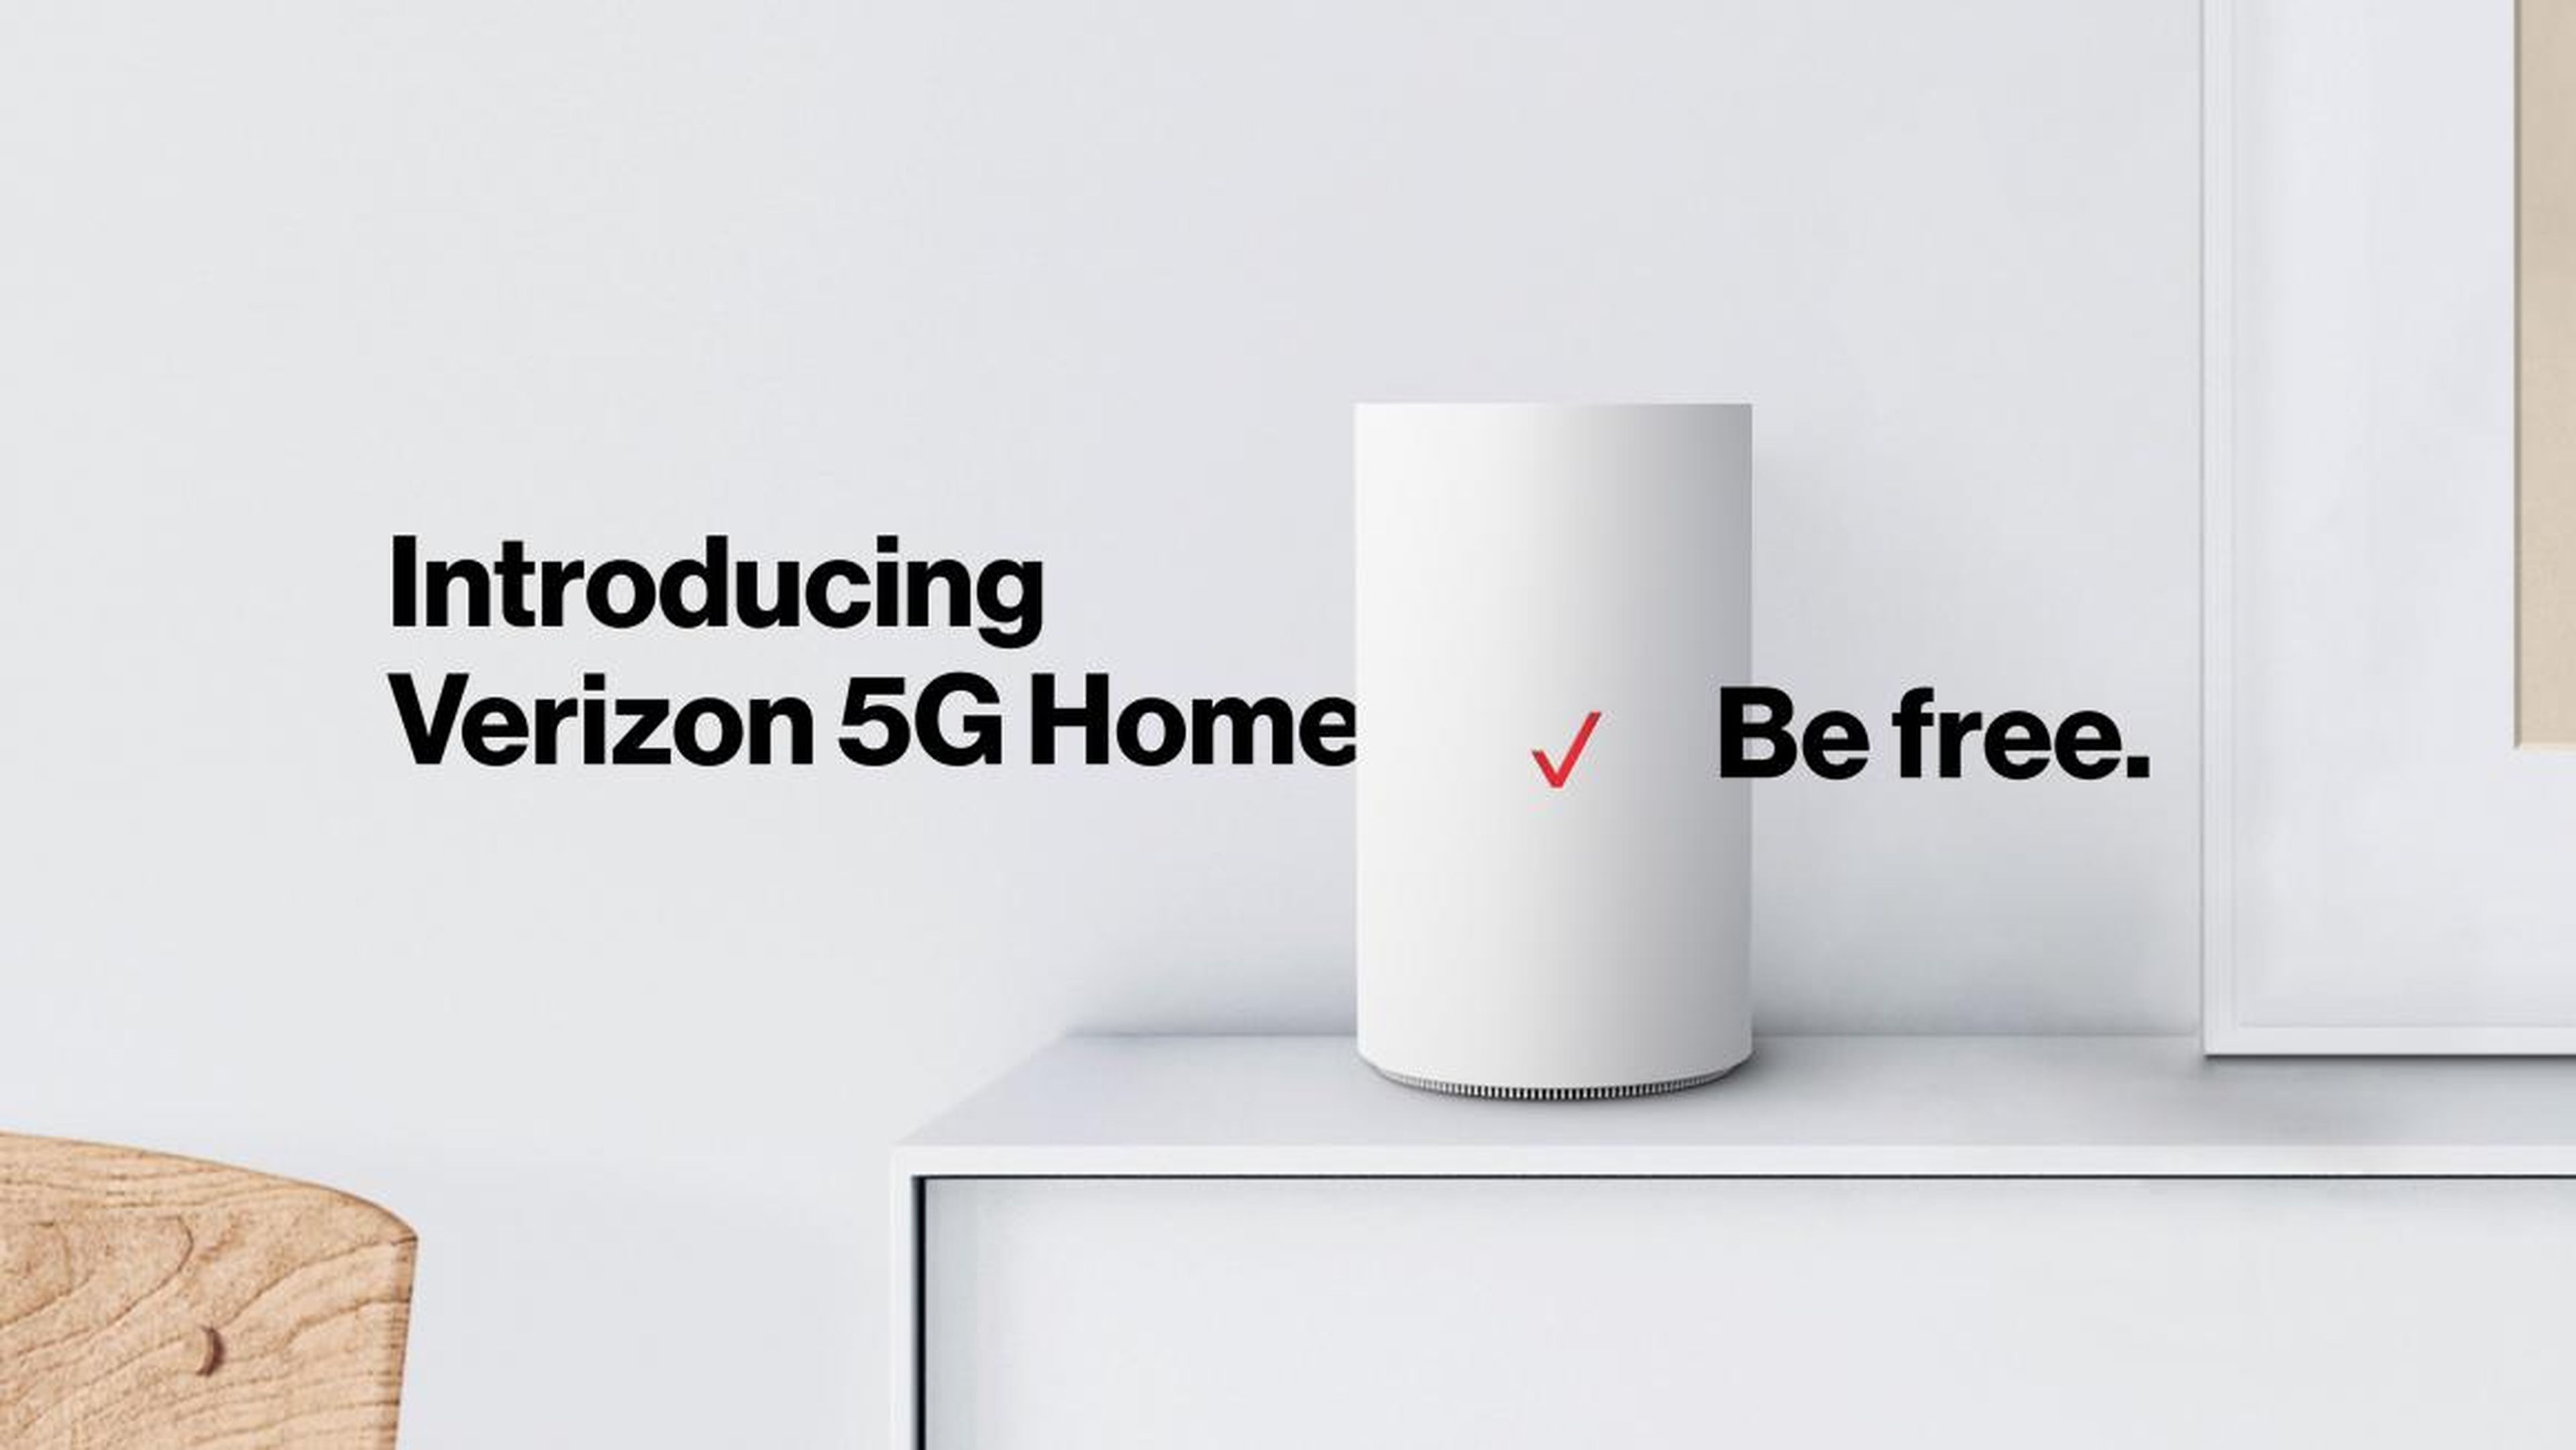 As a major provider of wireless data, Verizon has a vested interest in also providing the content you stream.